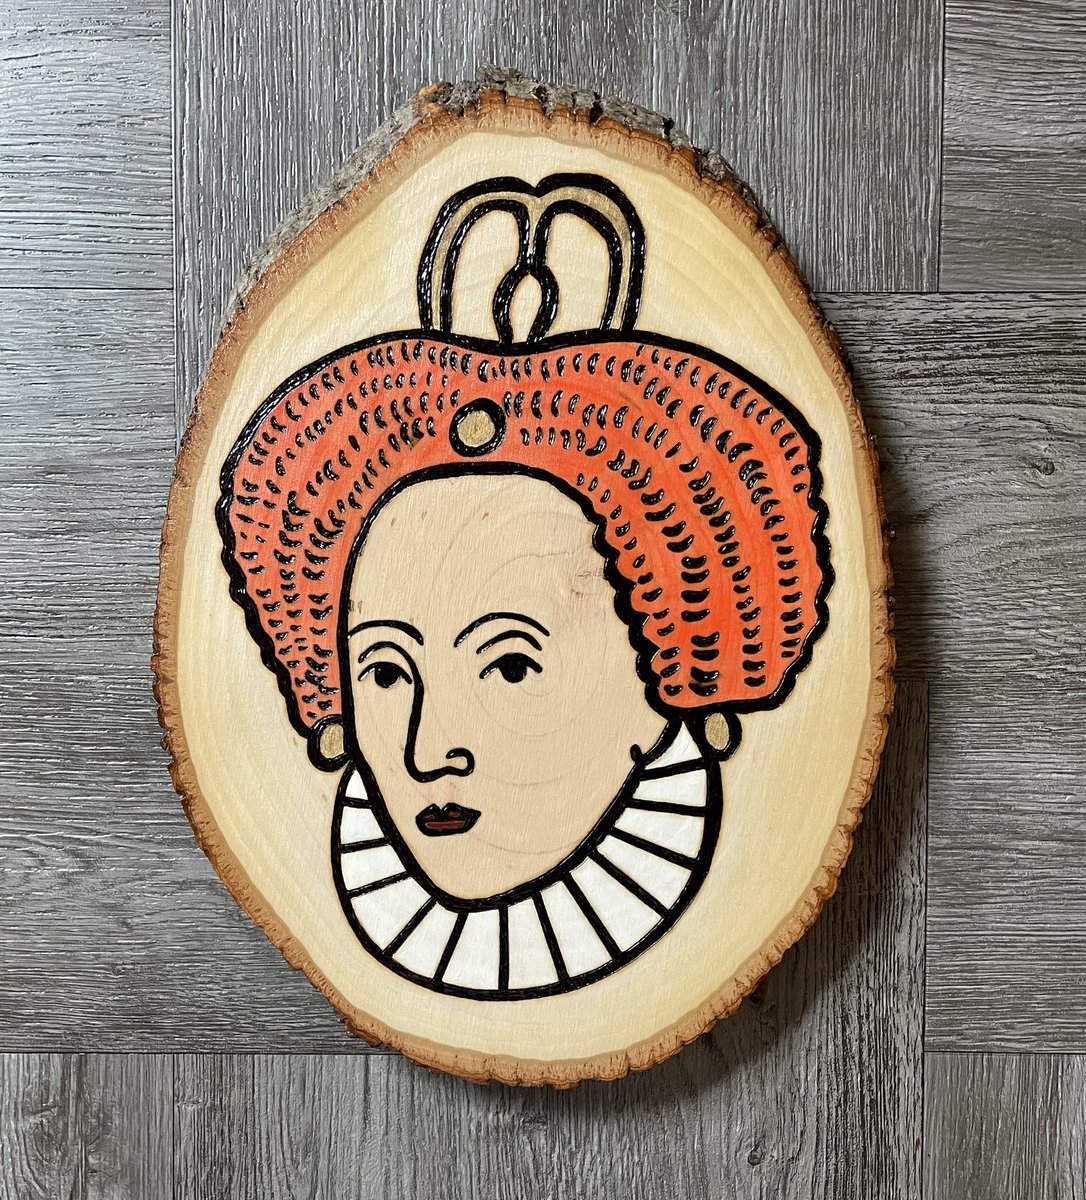 Pairing of being a wood burner + history buff for all things Tudor. 

These posts over on my Instagram are able to have much more descriptive material attached. On this one I touched on Elizabeth I notorious addiction to sugar. 🍰

#woodburned #tudorhistory